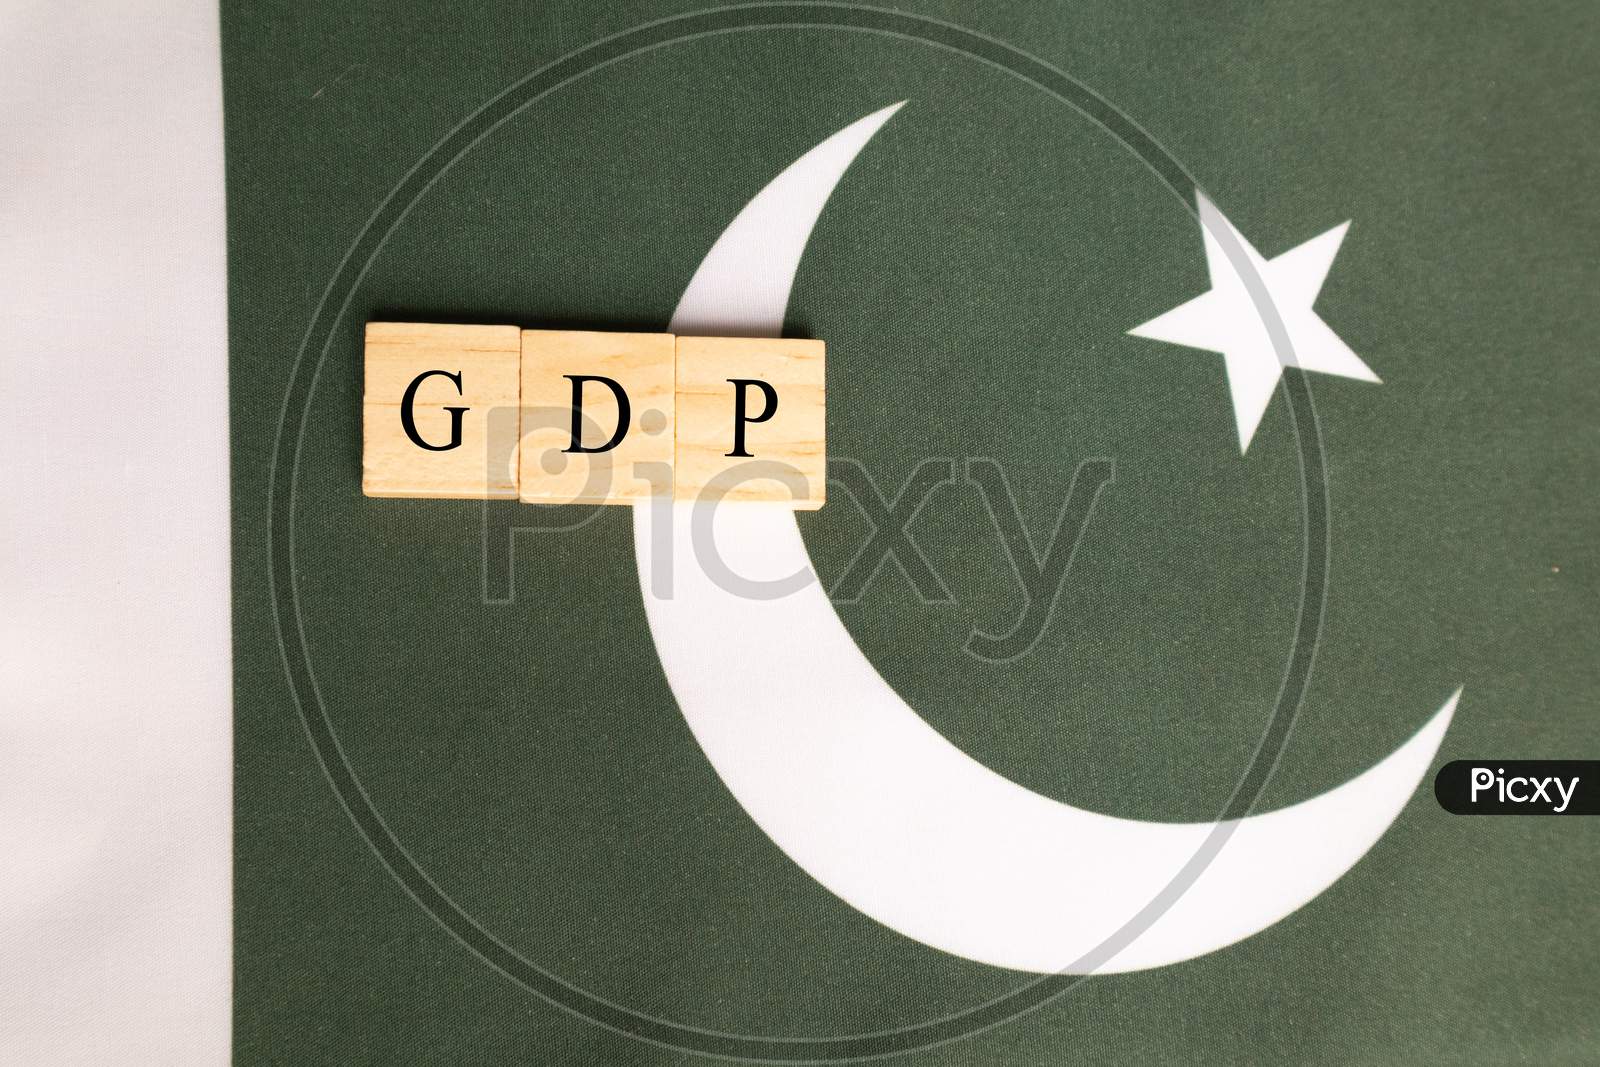 Gross Domestic Product Or Gdp Of Pakistan Concept On Pakistan Flag.